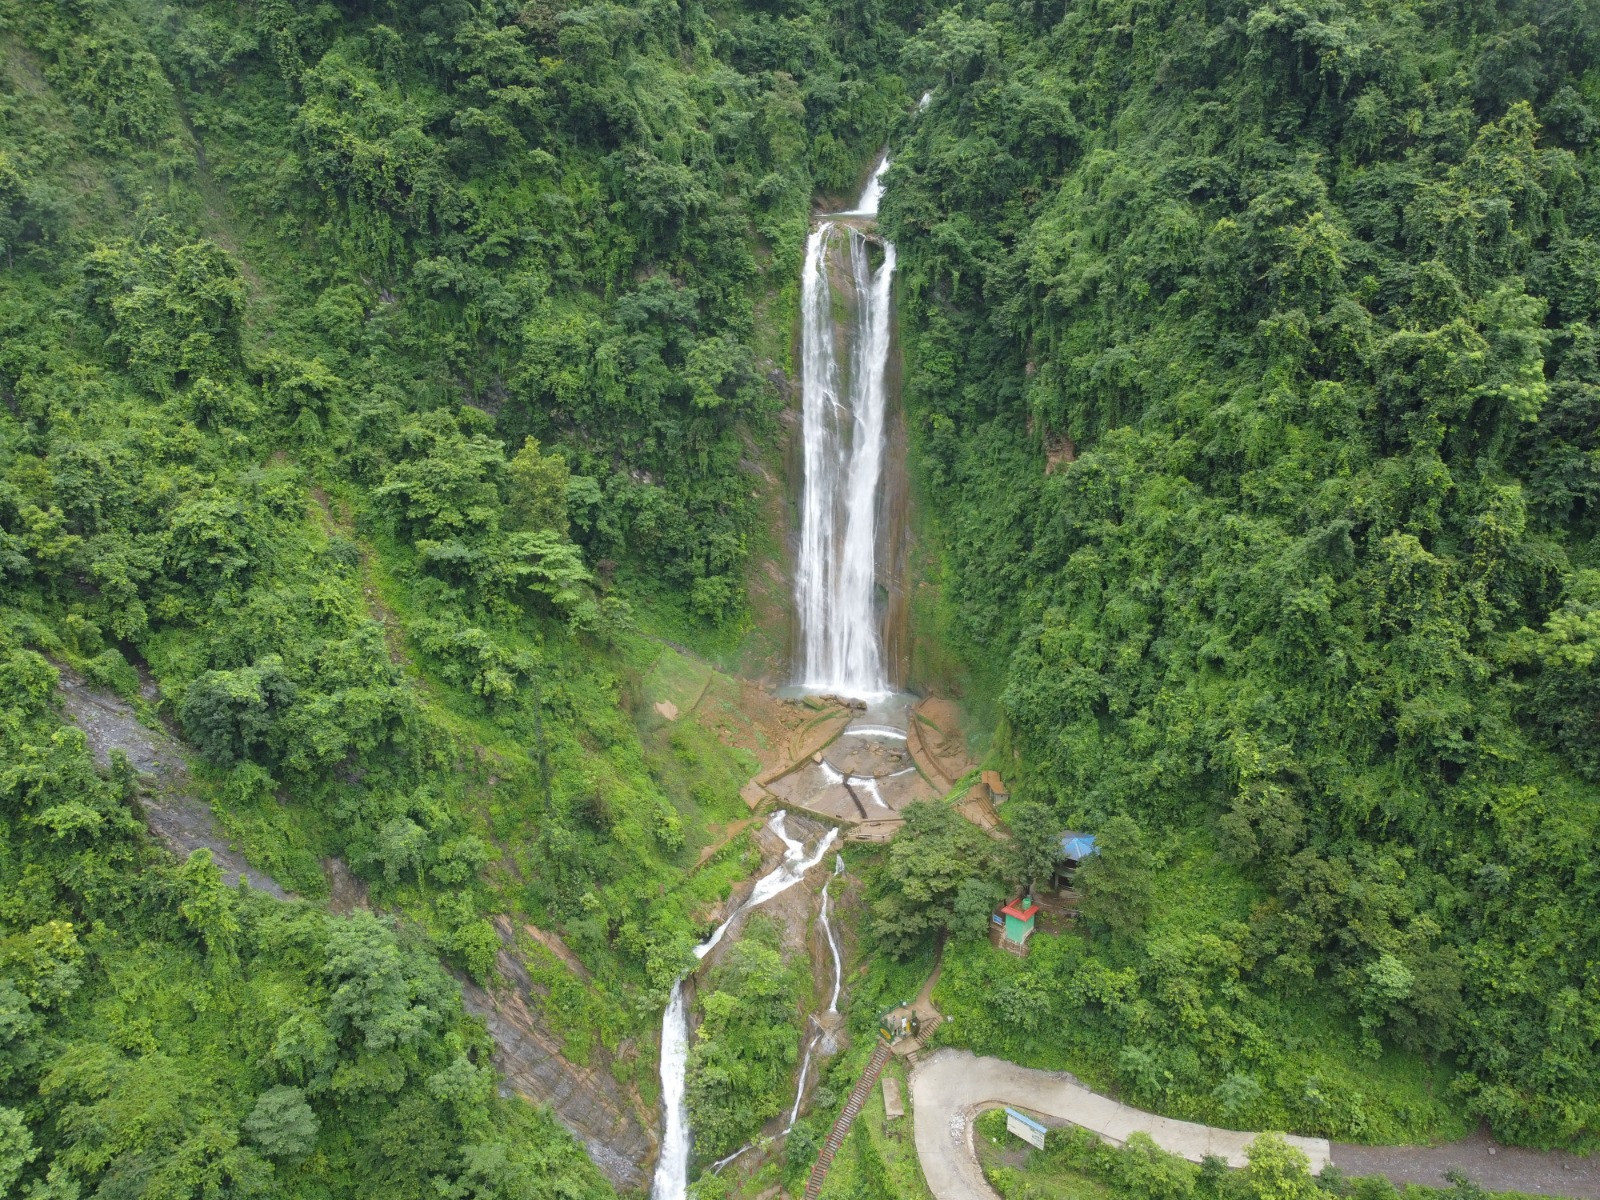 A picturesque view of majestic Jalbire waterfalls surrounded by the lush green Forest.